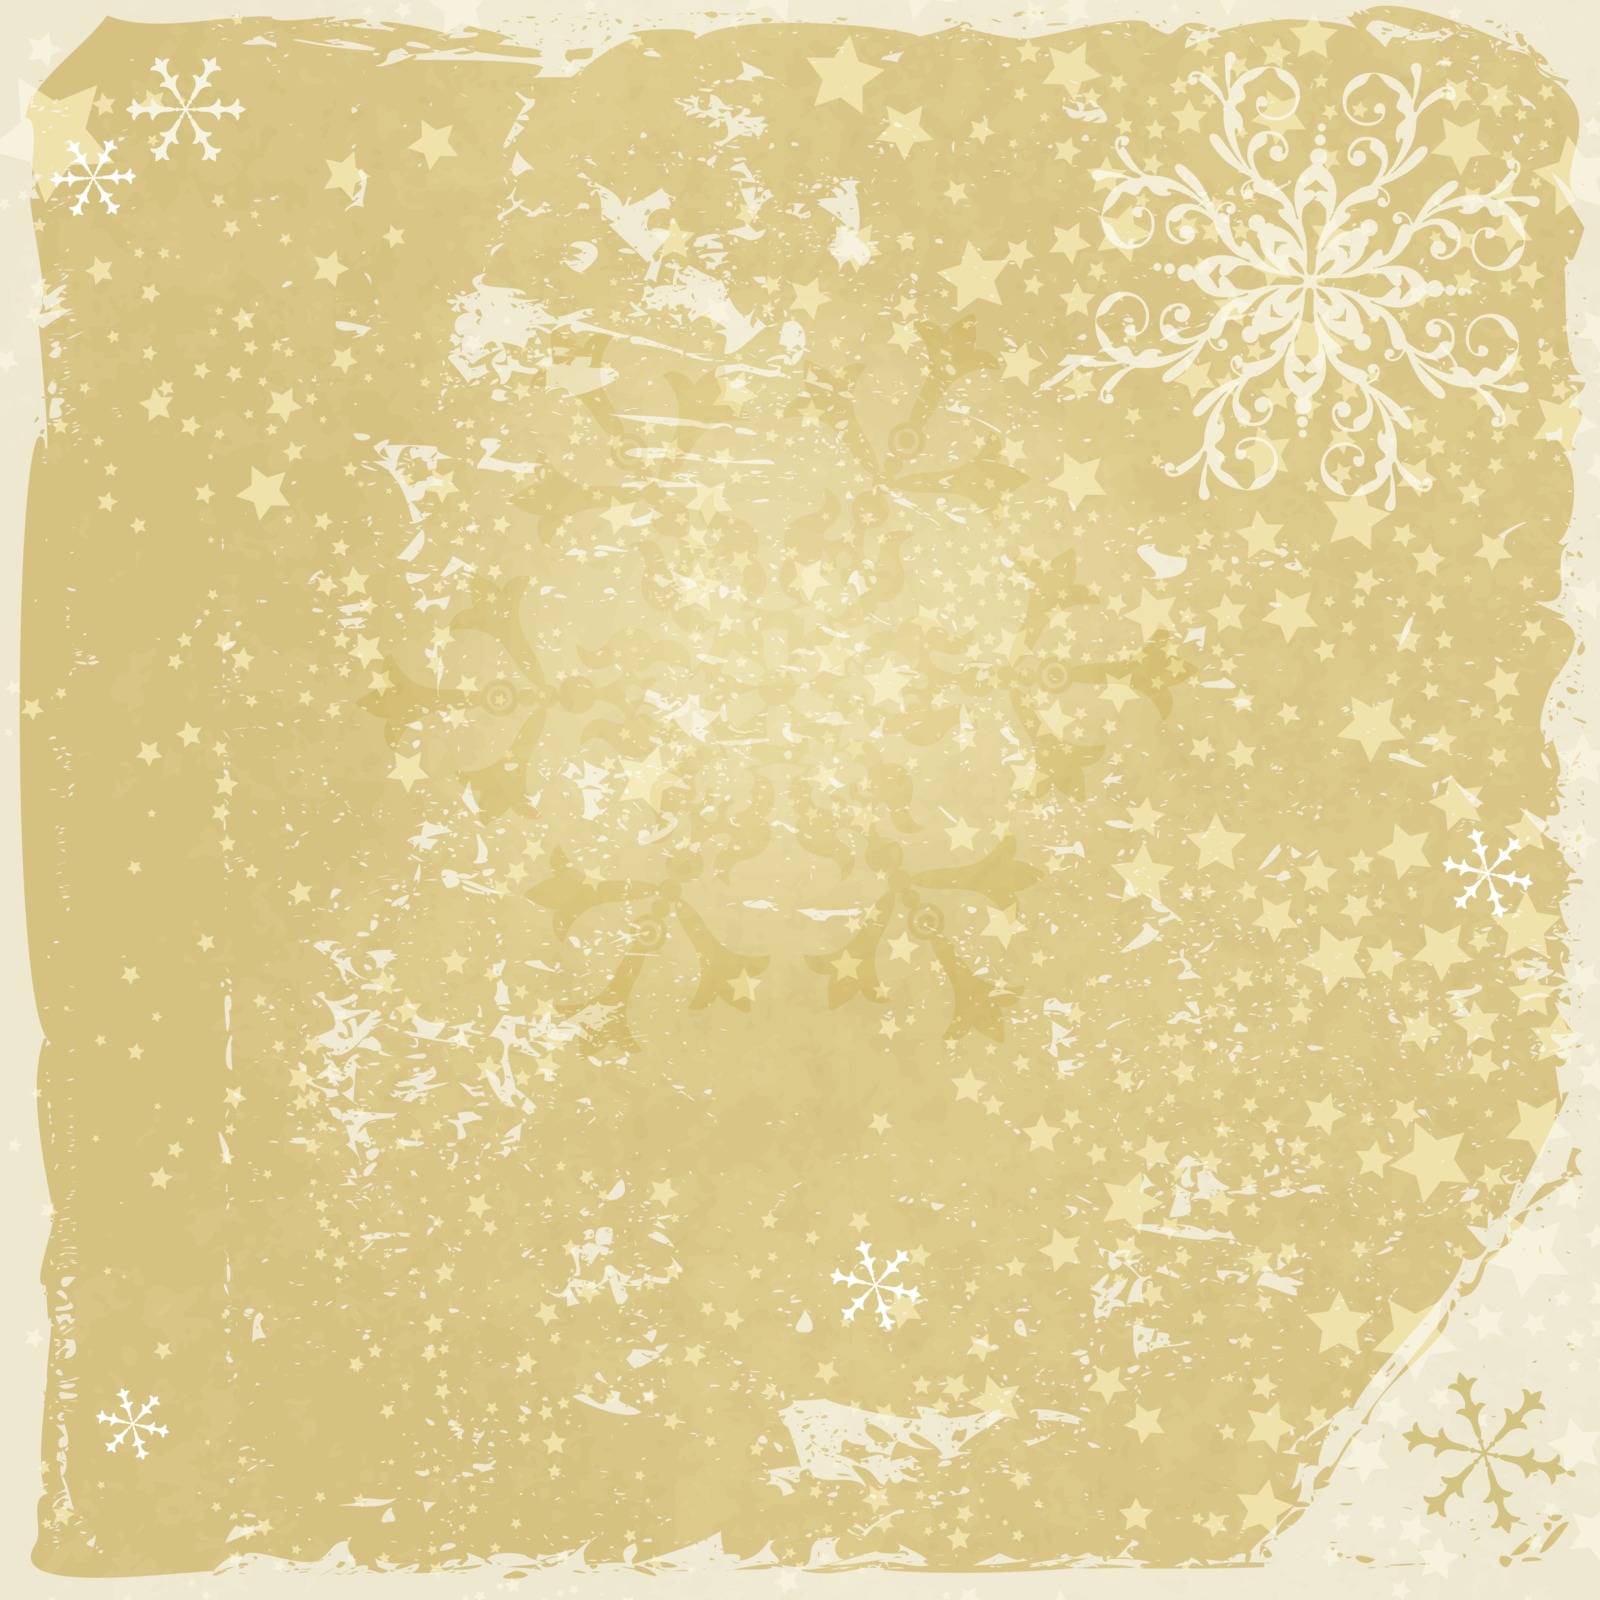 Grungy christmas frame with translucent snowflakes and stars (vector eps 10)